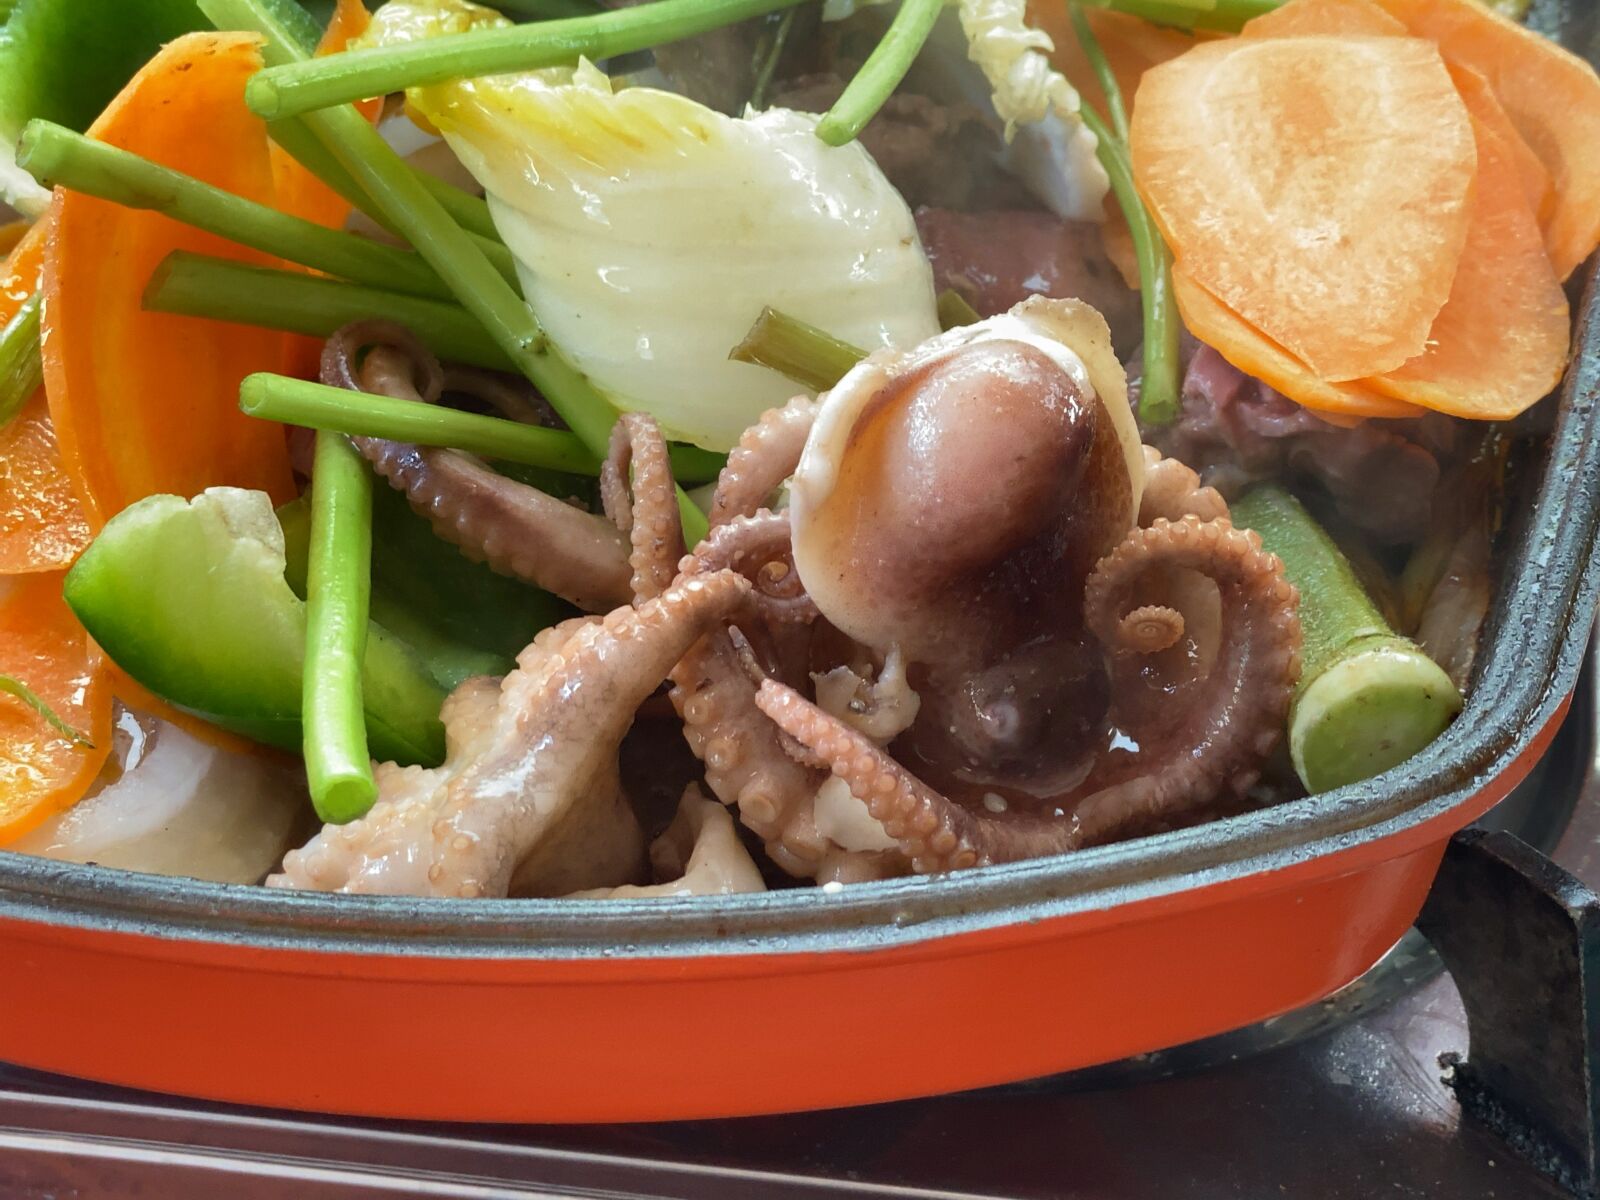 Apple iPhone 11 Pro Max + iPhone 11 Pro Max back camera 6mm f/2 sample photo. Food, squid, octopus photography